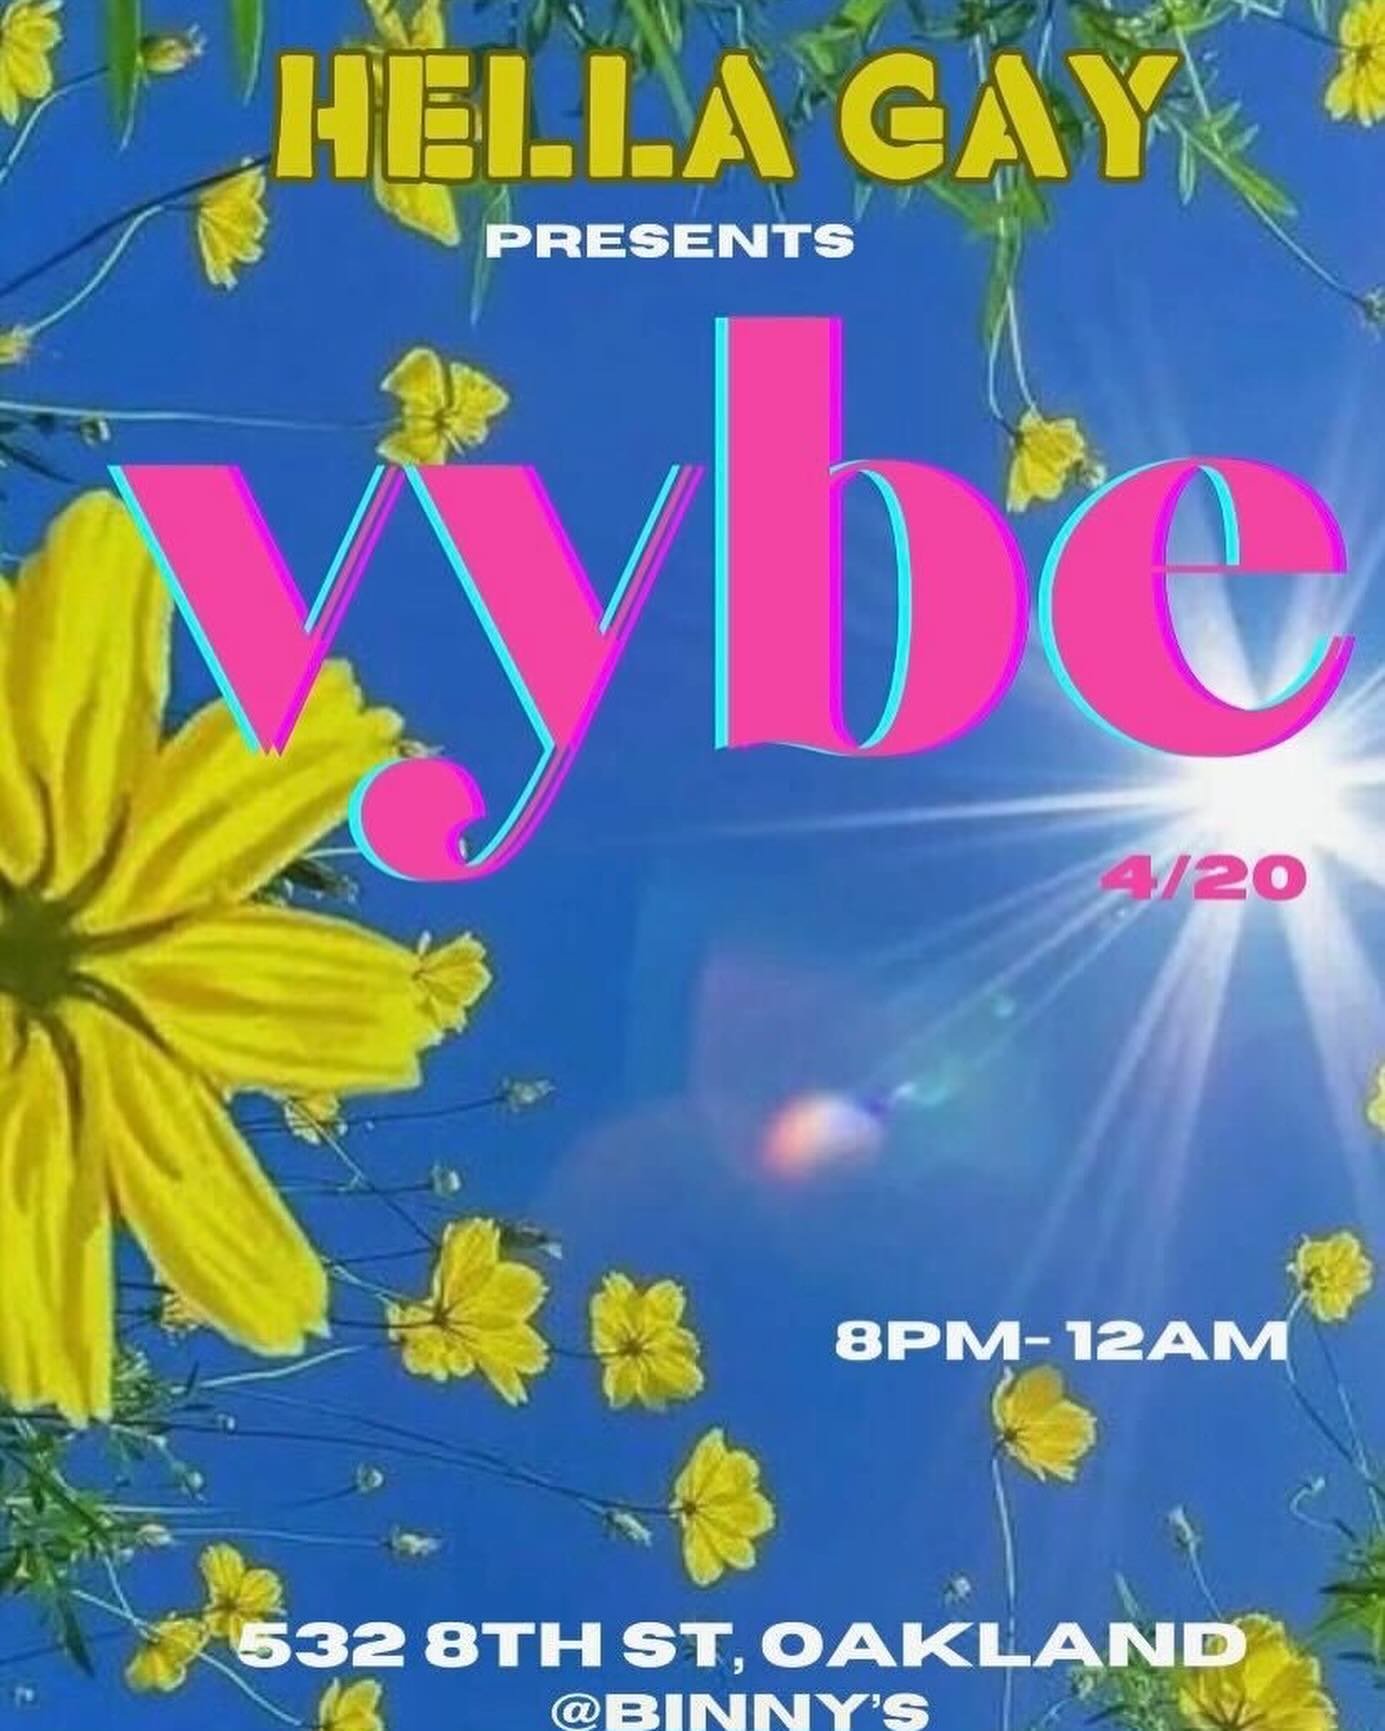 @hellagaydanceparty presents their new summer VYBE at Binny&rsquo;s tonight! Come out 8pm-midnight tonight!! Saturday 4/20! DJs @homofongo @dj_karebear 

#hellagay #queer #lgbtq #bass #hiphop #trap #housemusic #oakland #sanfrancisco #510 #vybe #gayar